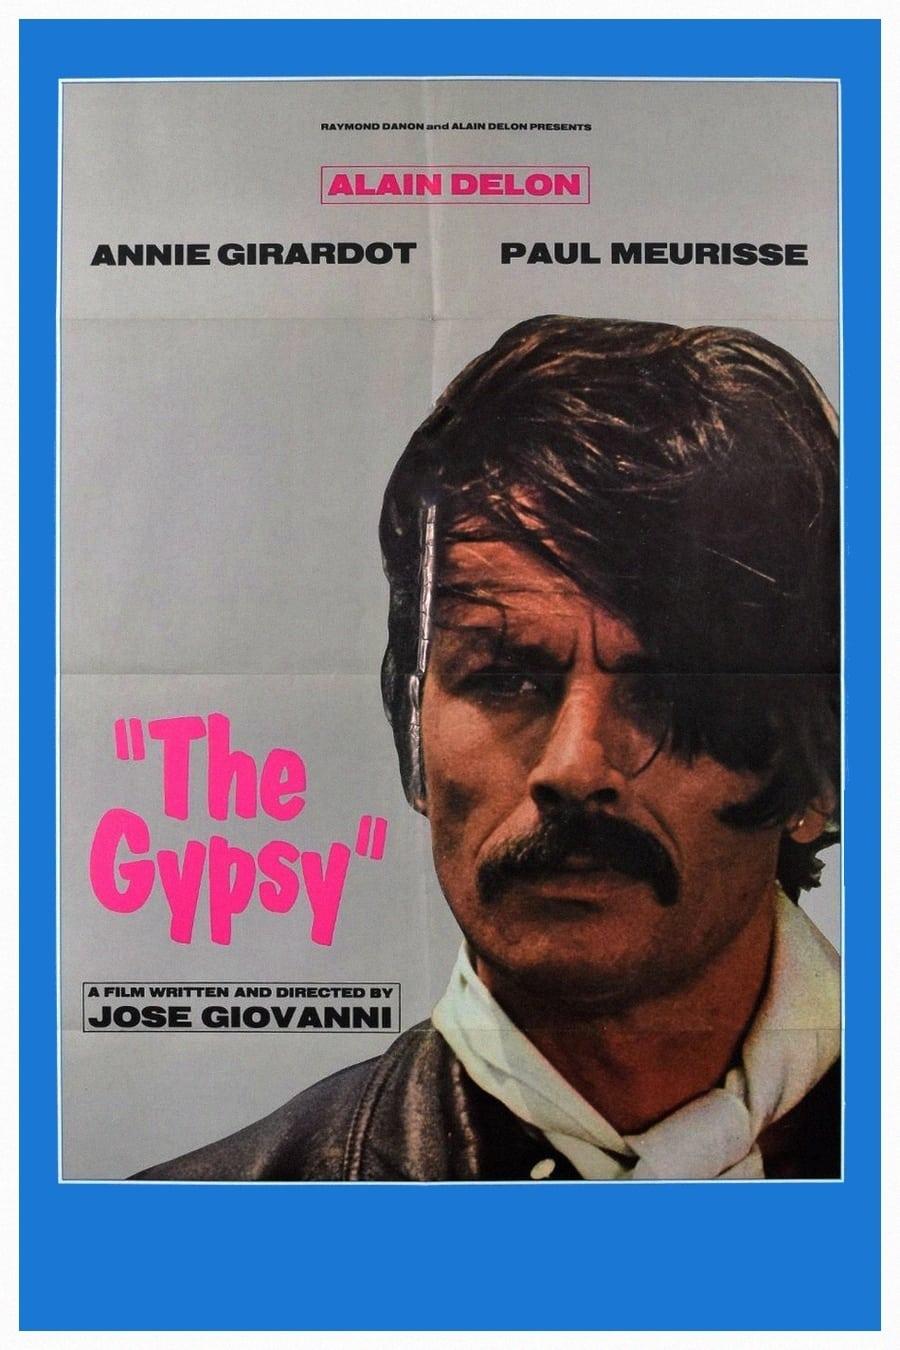 The Gypsy poster